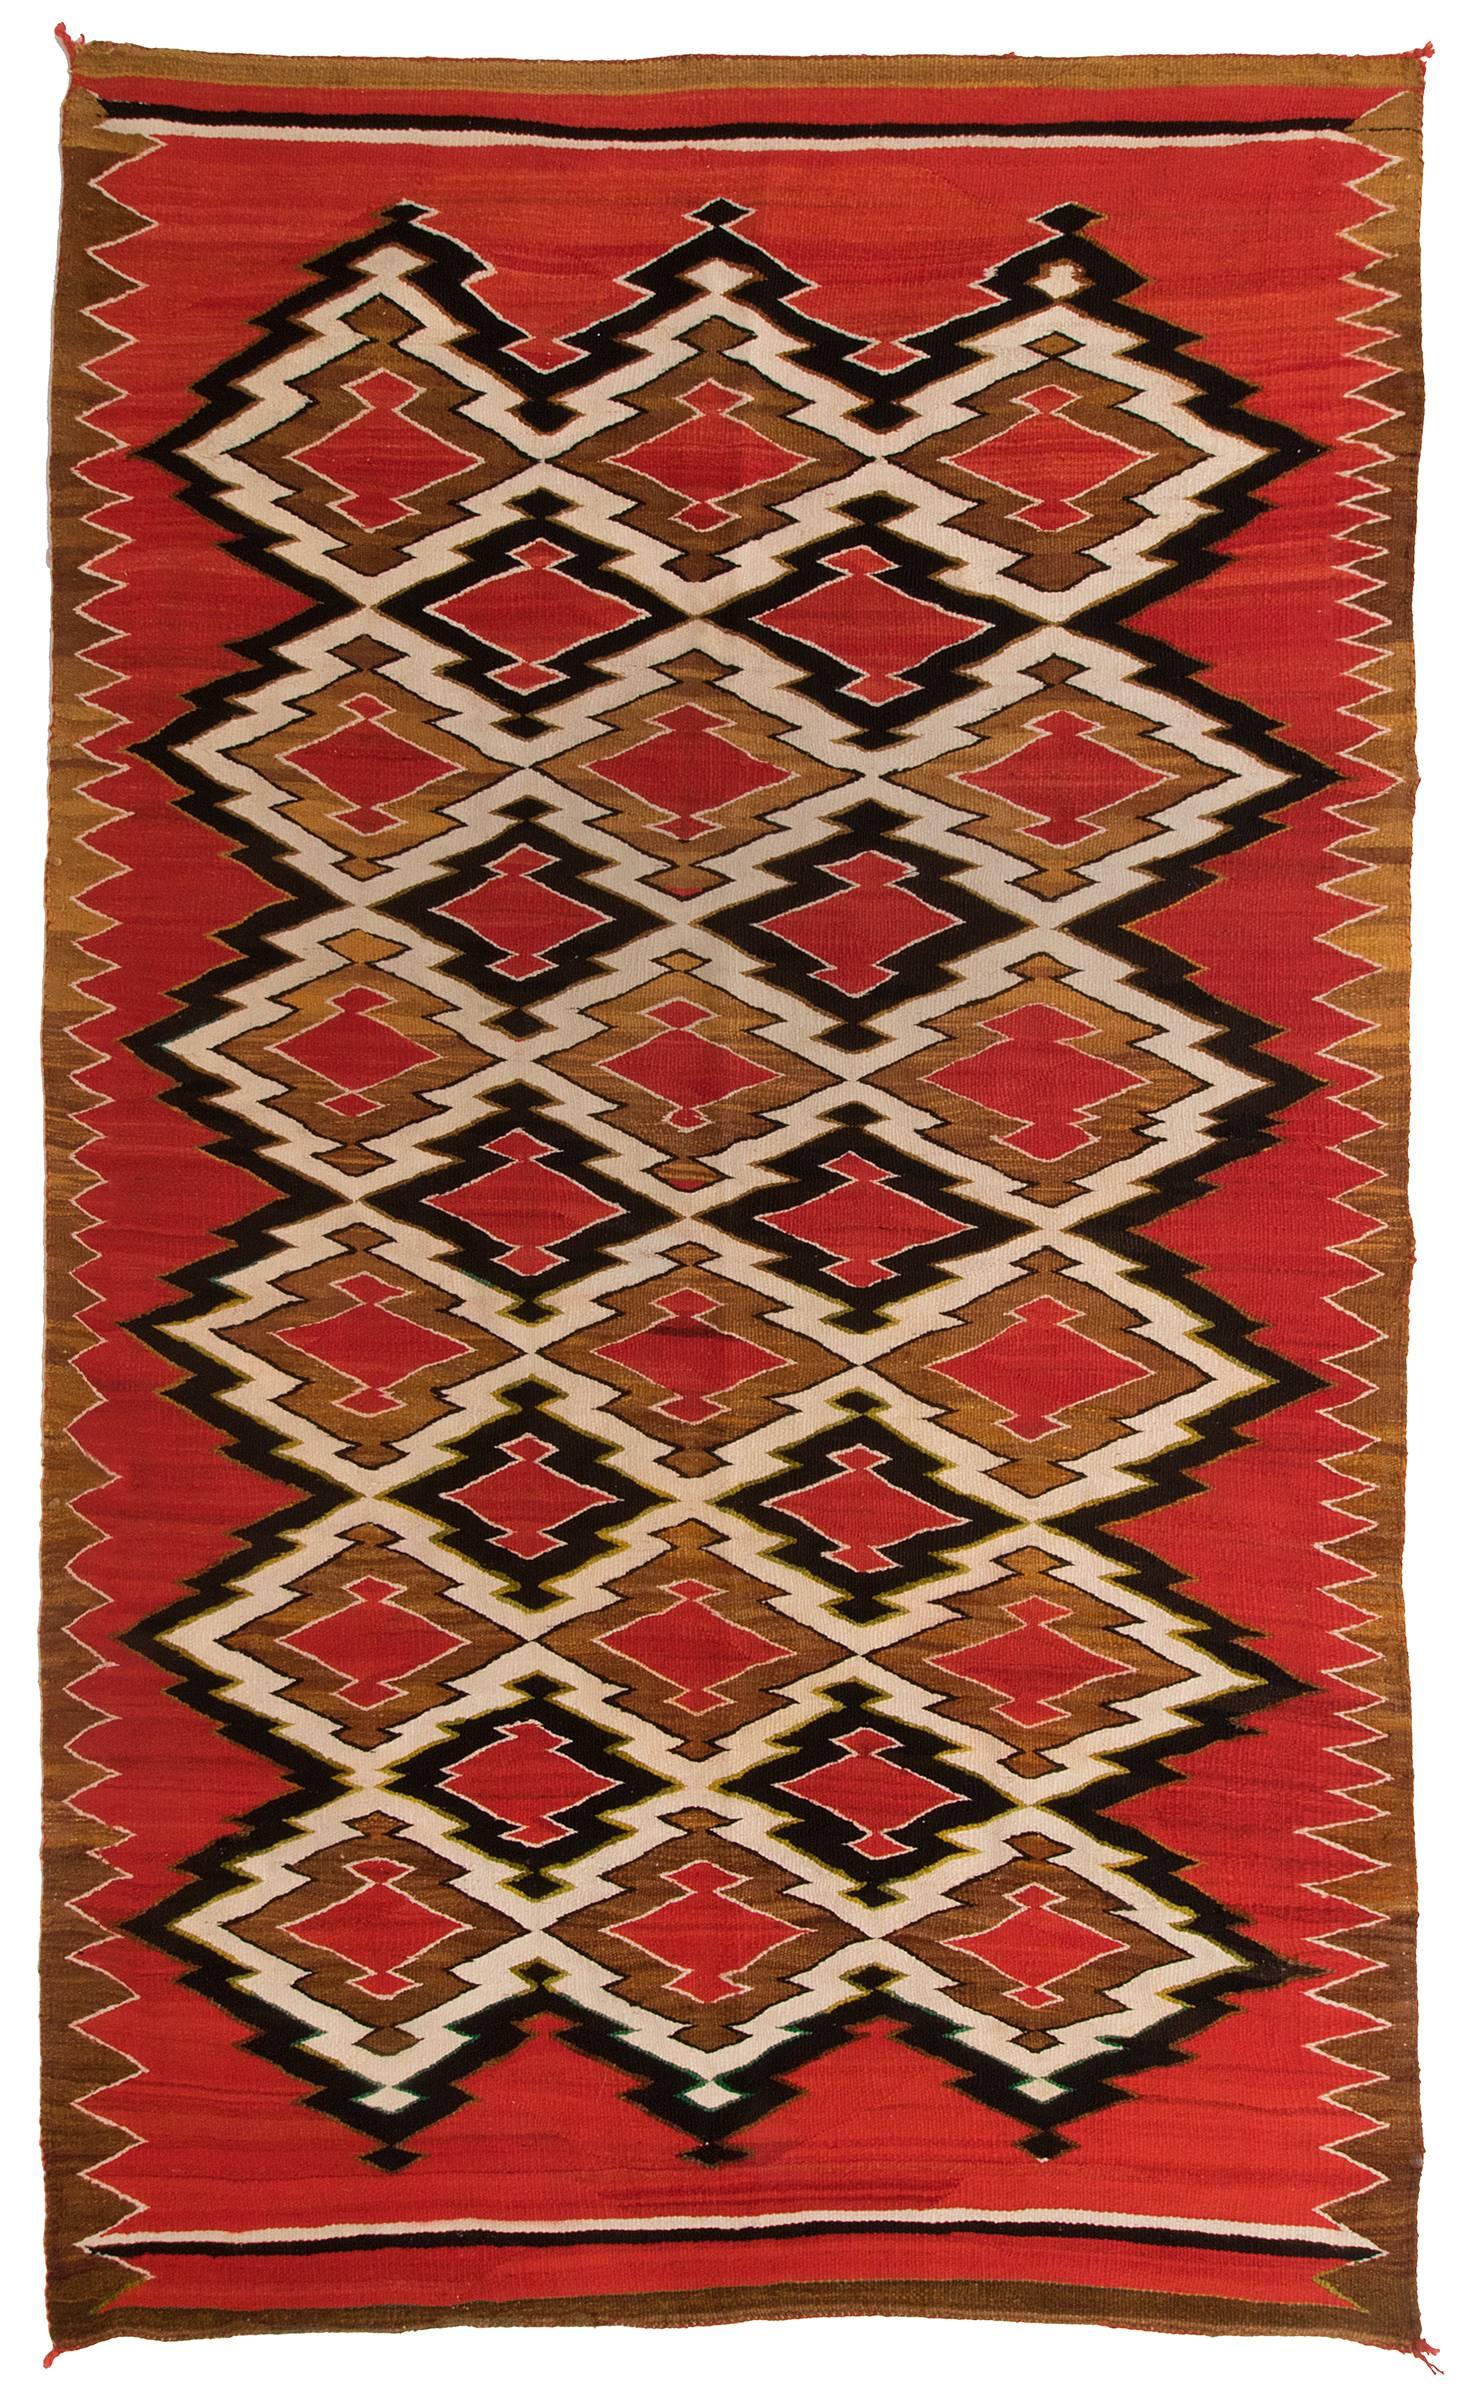 Hand-Woven Antique Navajo Transitional Blanket/Weaving, 19th Century